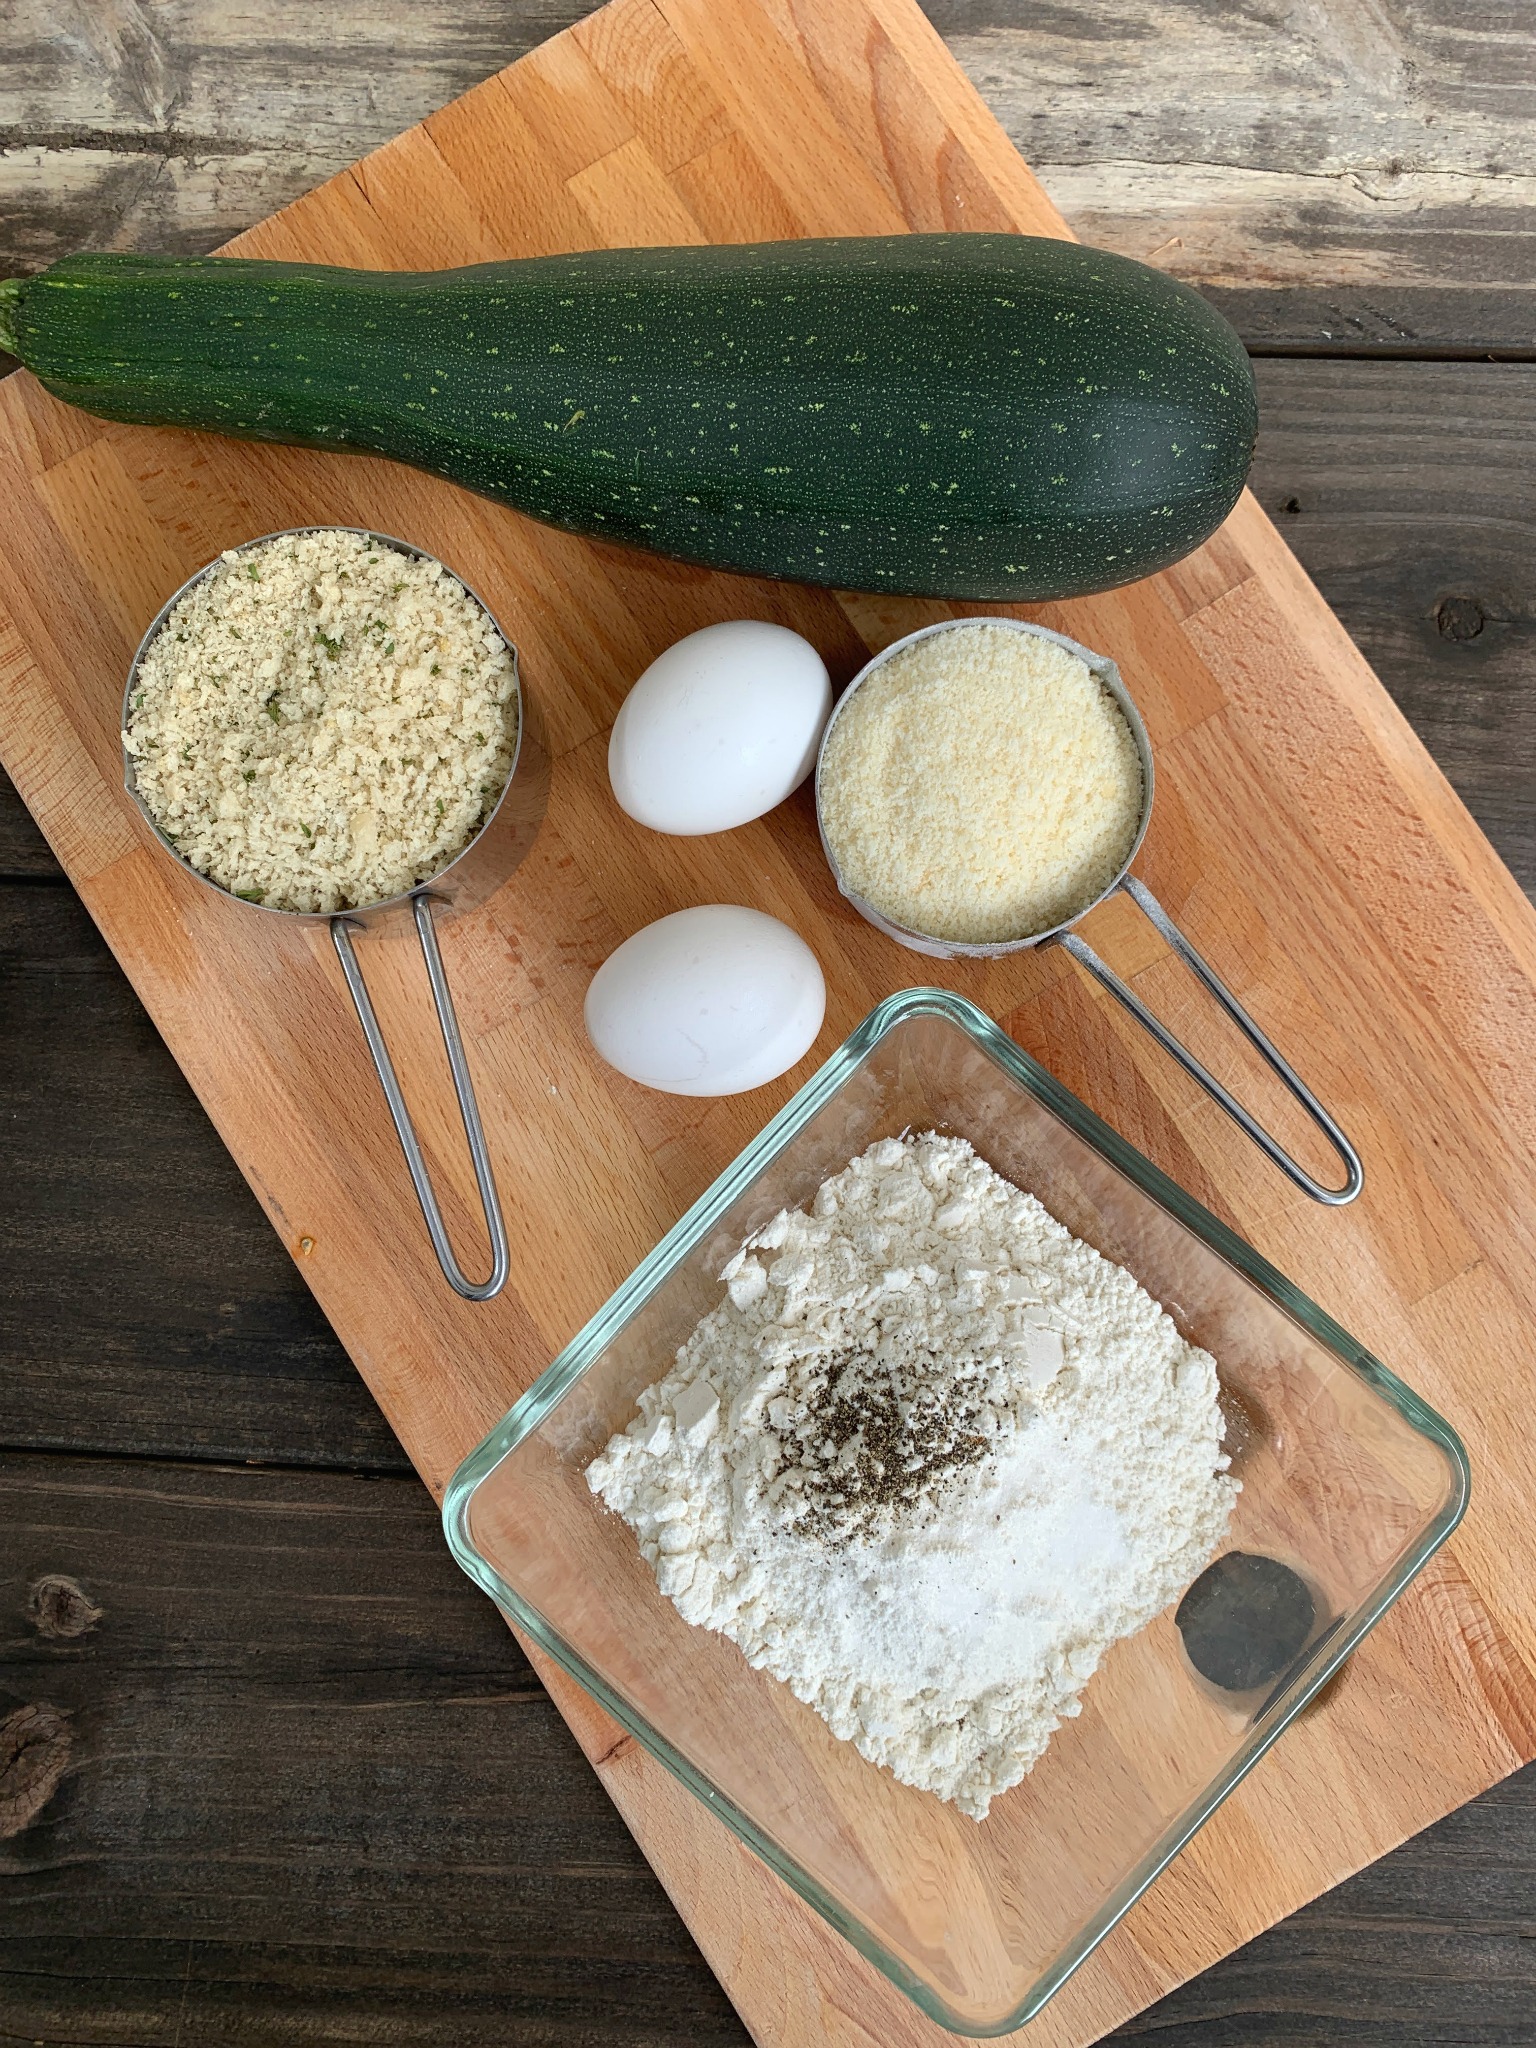 wooden cutting board with zucchini, measuring cups with panko bread crumbs and parmesan, 2 eggs and a glass bowl with flour